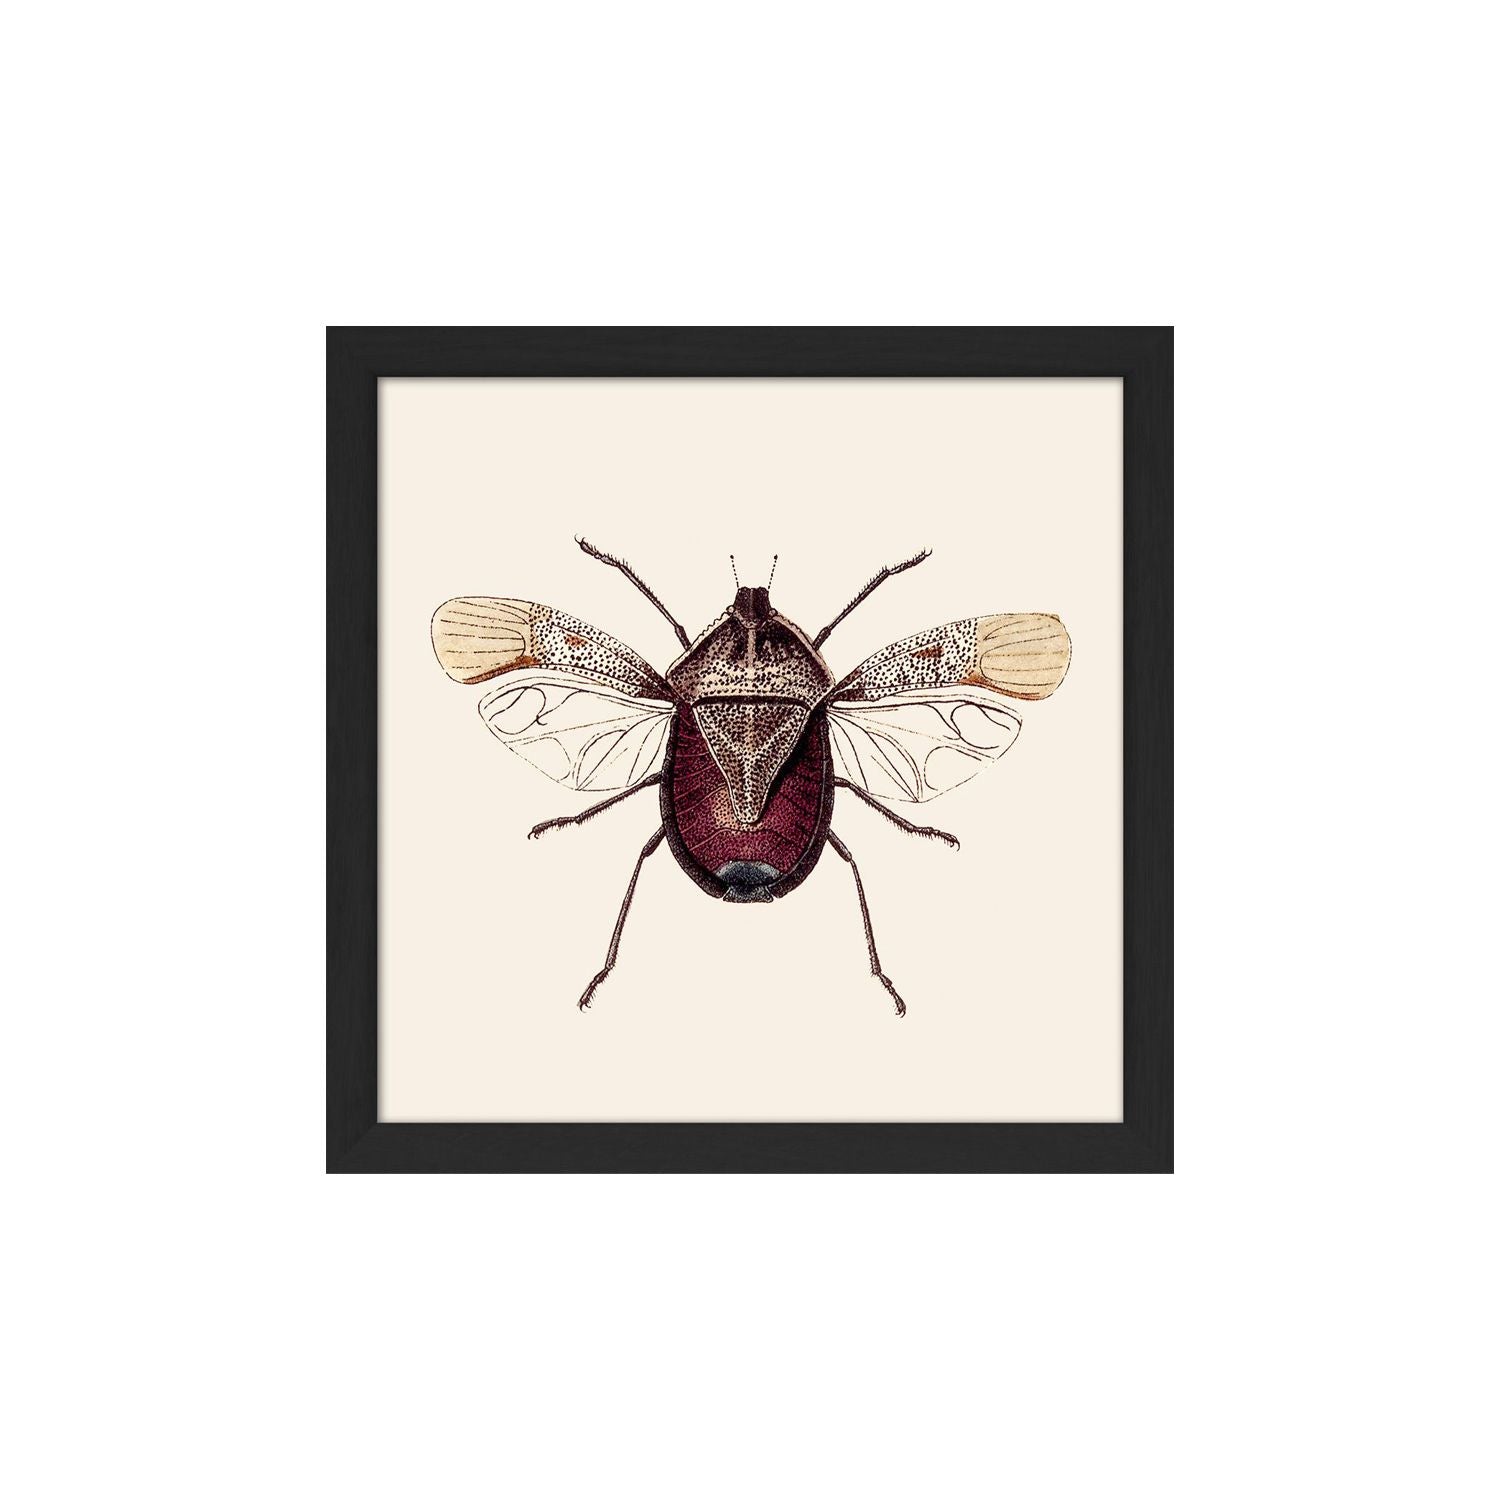 No. SQ119 Dark Red Insect With Black Frame - 15cm x 15cm